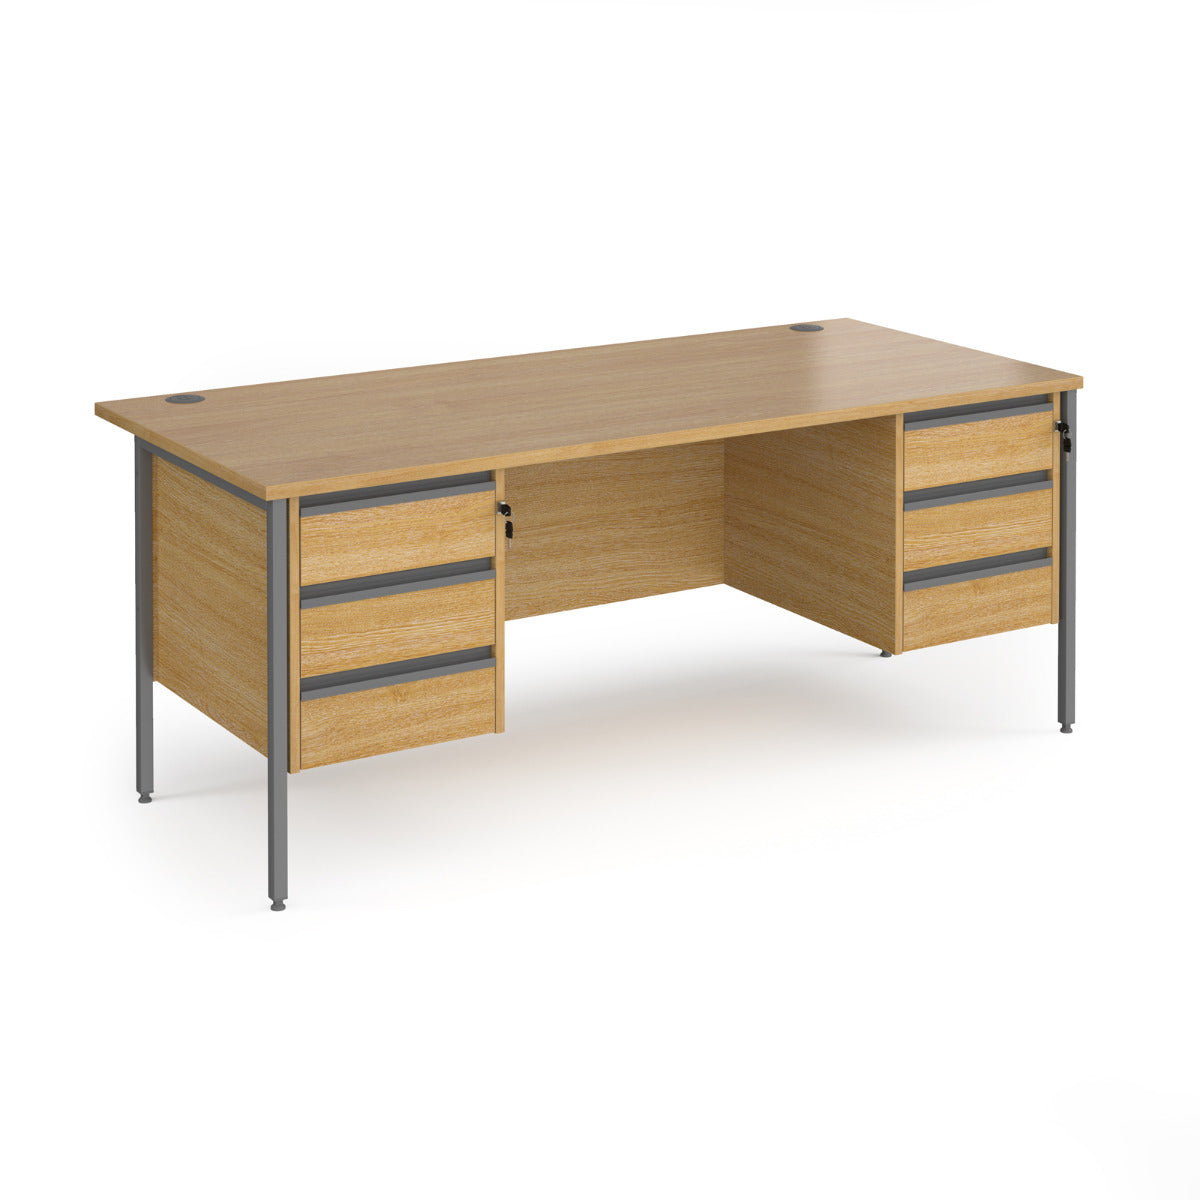 Contract H Frame Straight Office Desk with Three & Three Drawer Storage